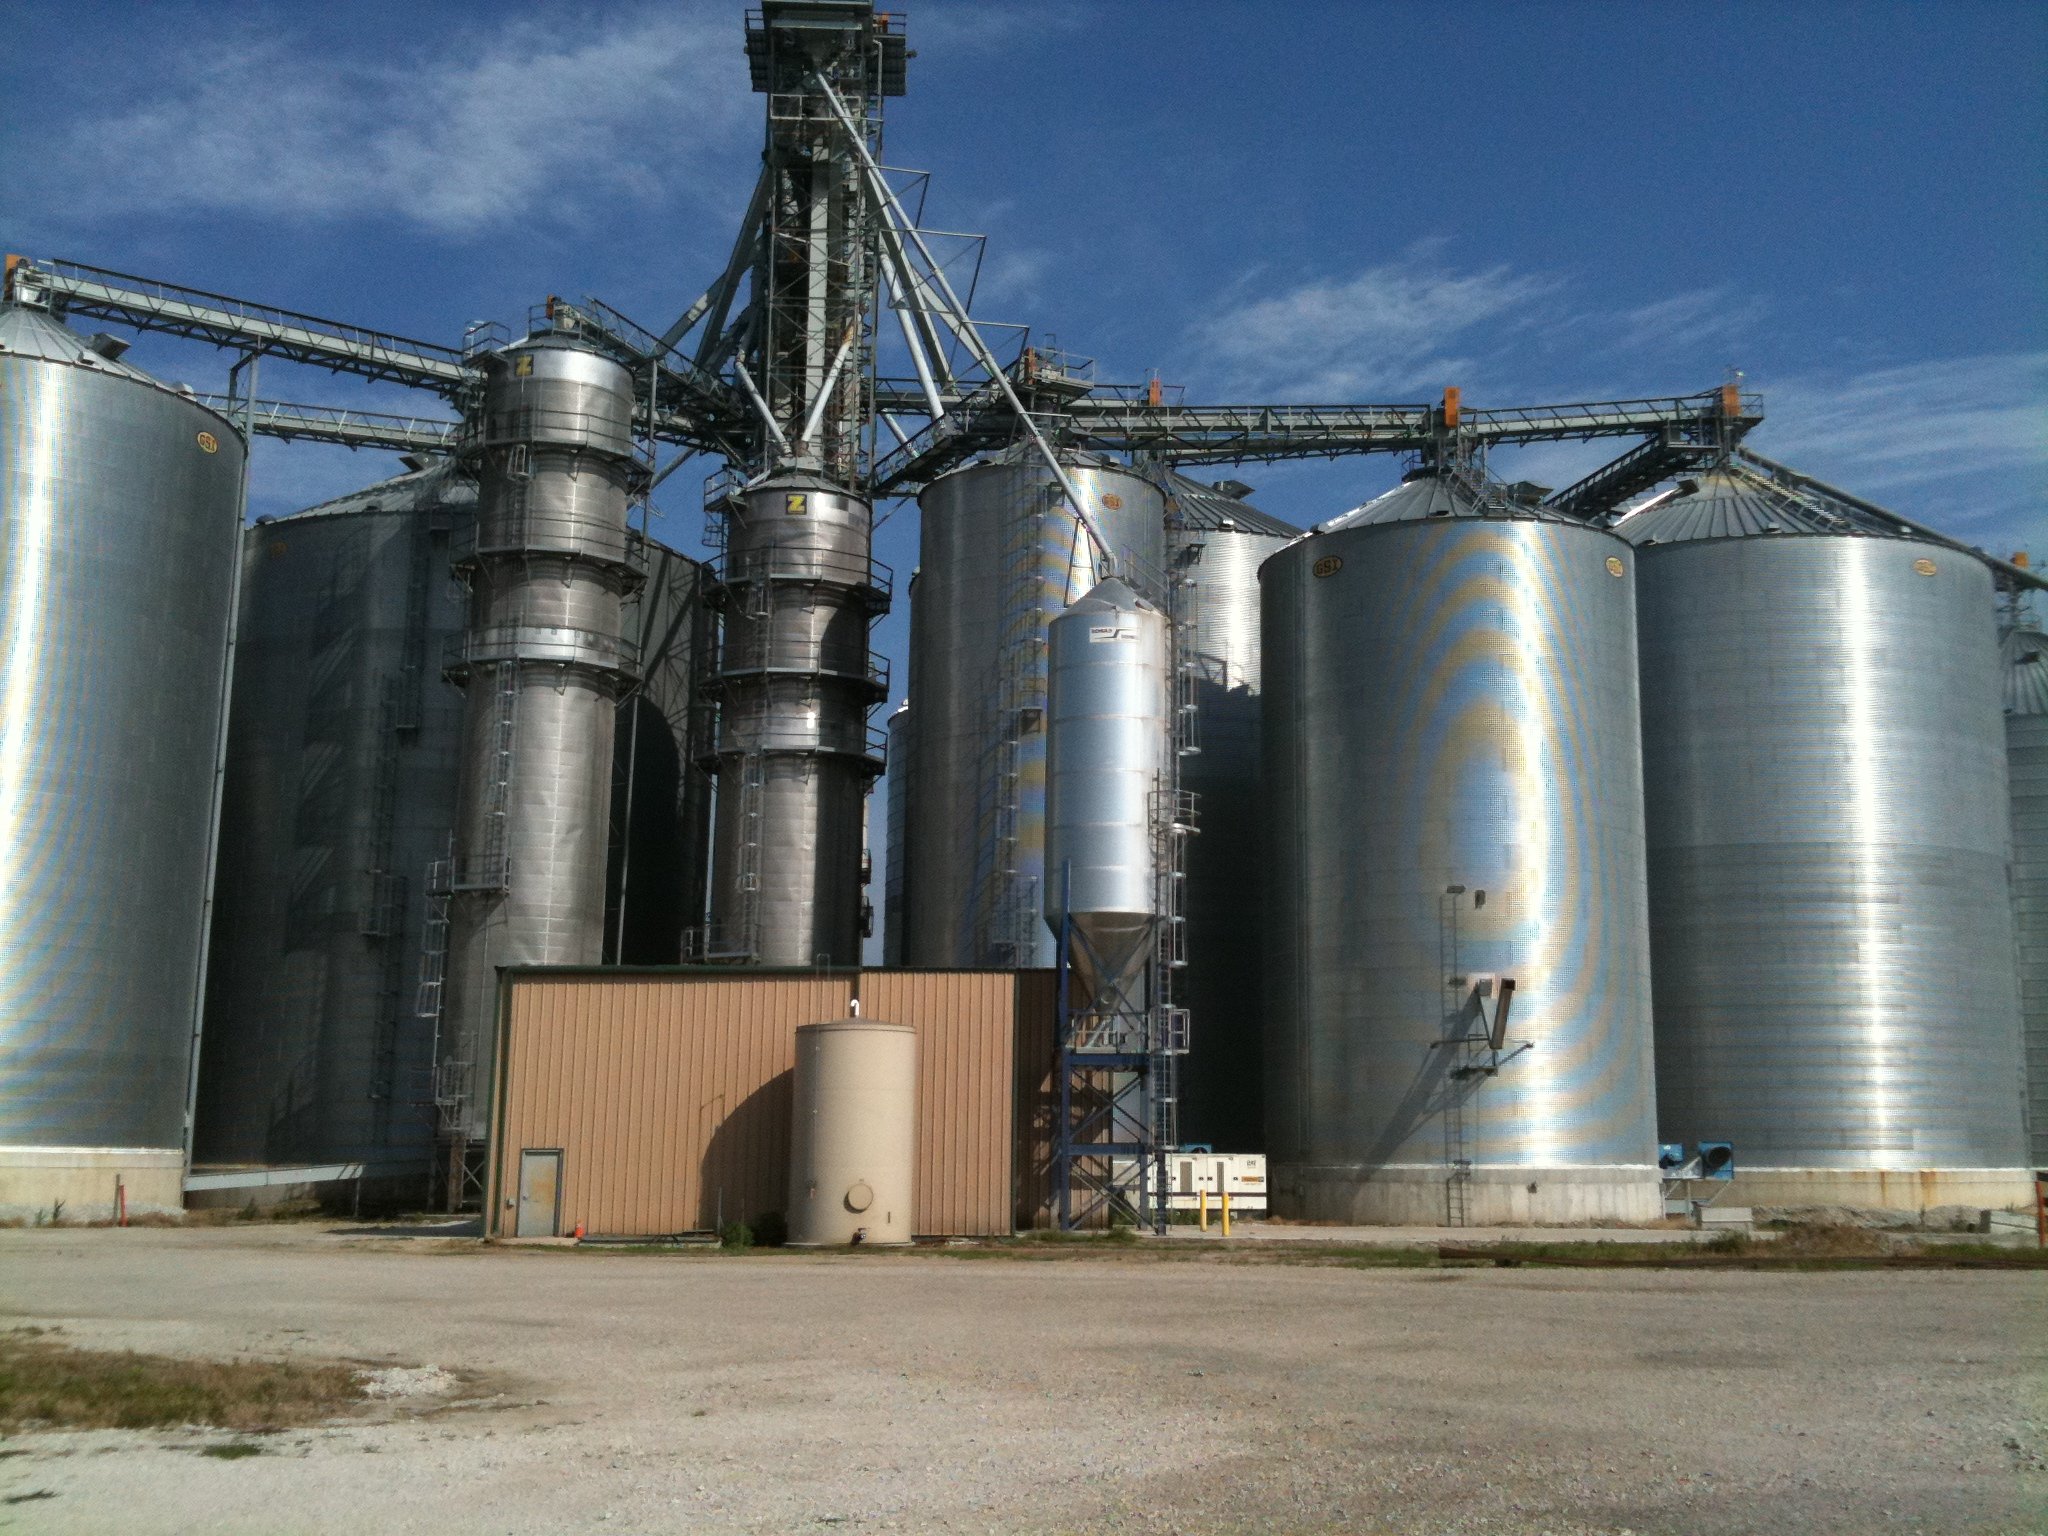 Price Later Fees Part 1: Changing Fees & the Grain Merchandising Behind It